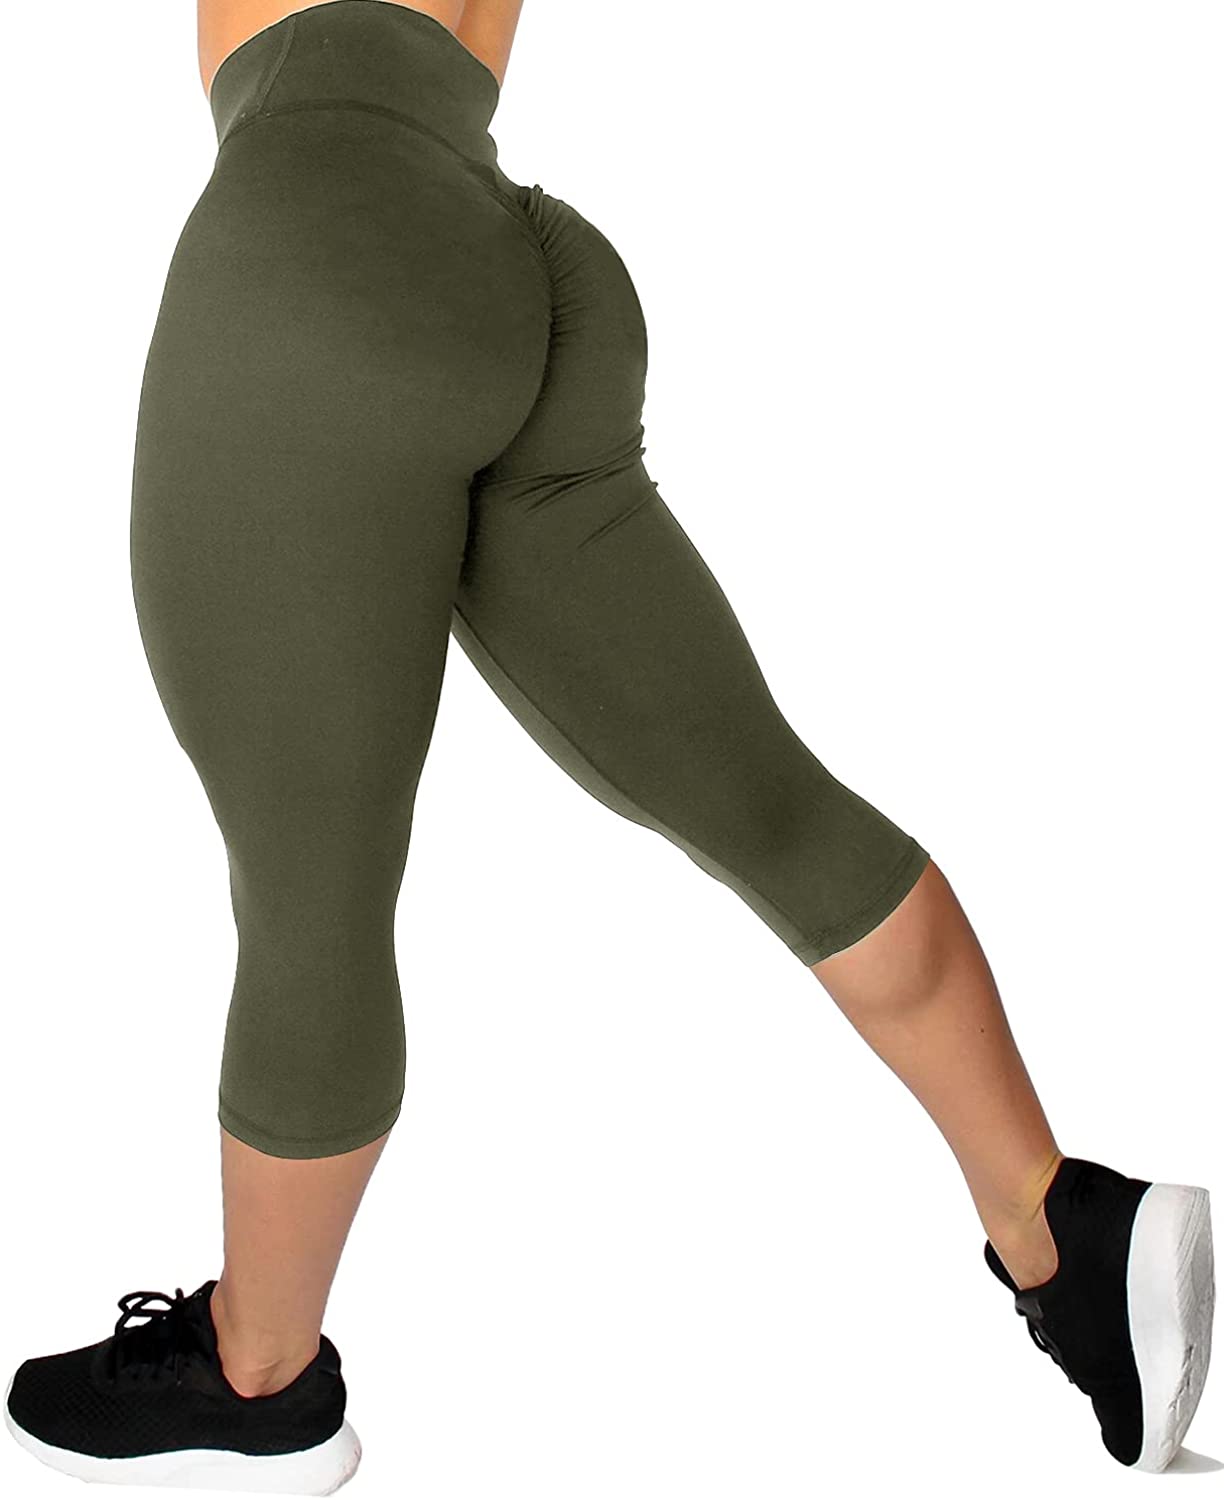 SELONE High Waisted Leggings for Women Workout Butt Lifting Jumpsuits High  Waist Sports Yogalicious Utility Dressy Everyday Soft Lifting Leggings  Capri Jeggings Athletic Leggings 28-Mint Green M 